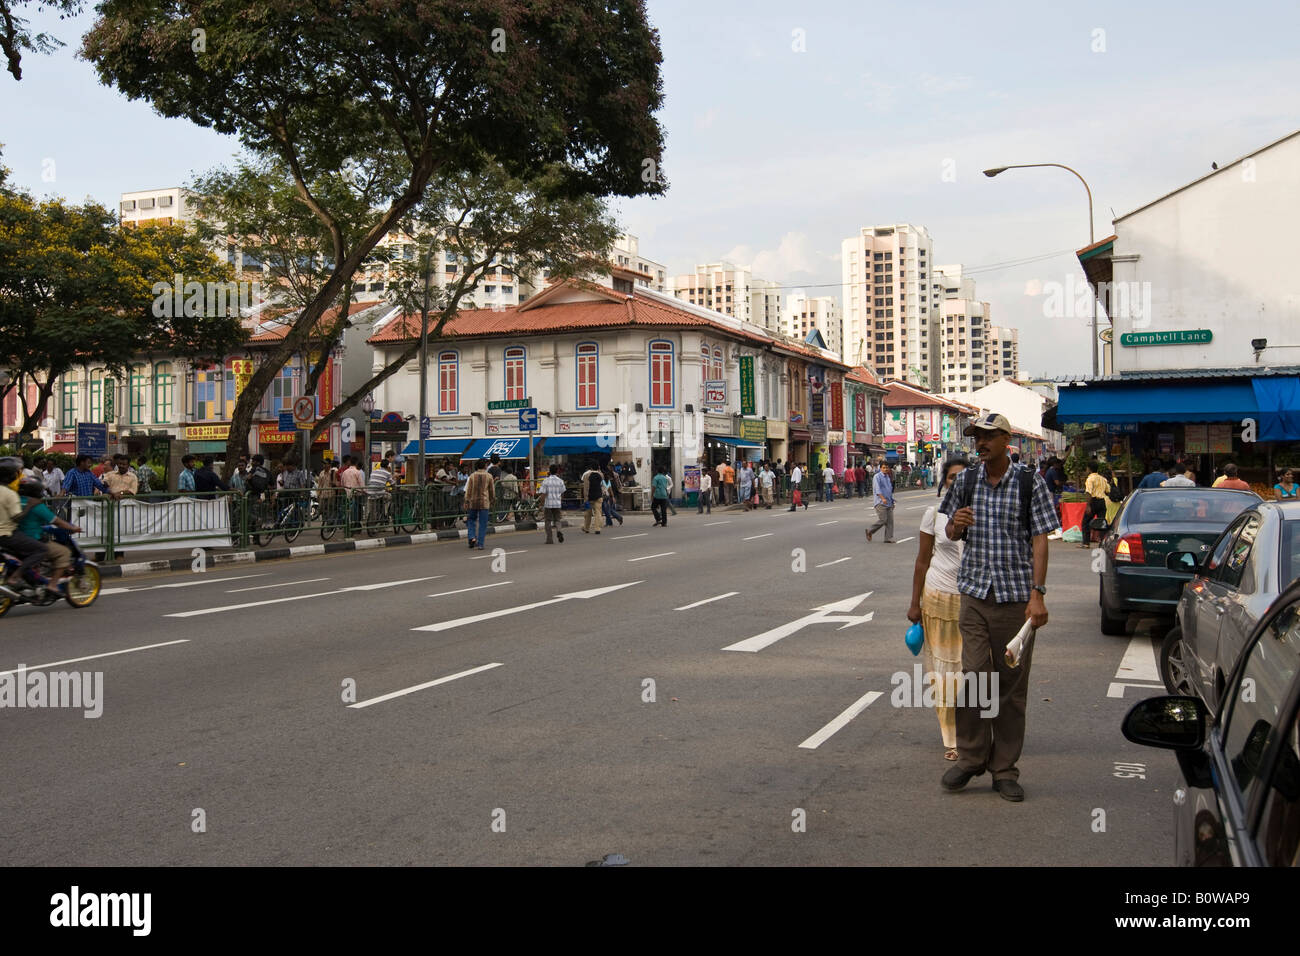 Lively street scene along Kitchener Road in Little India, Indian Quarter, Singapore, Southeast Asia Stock Photo